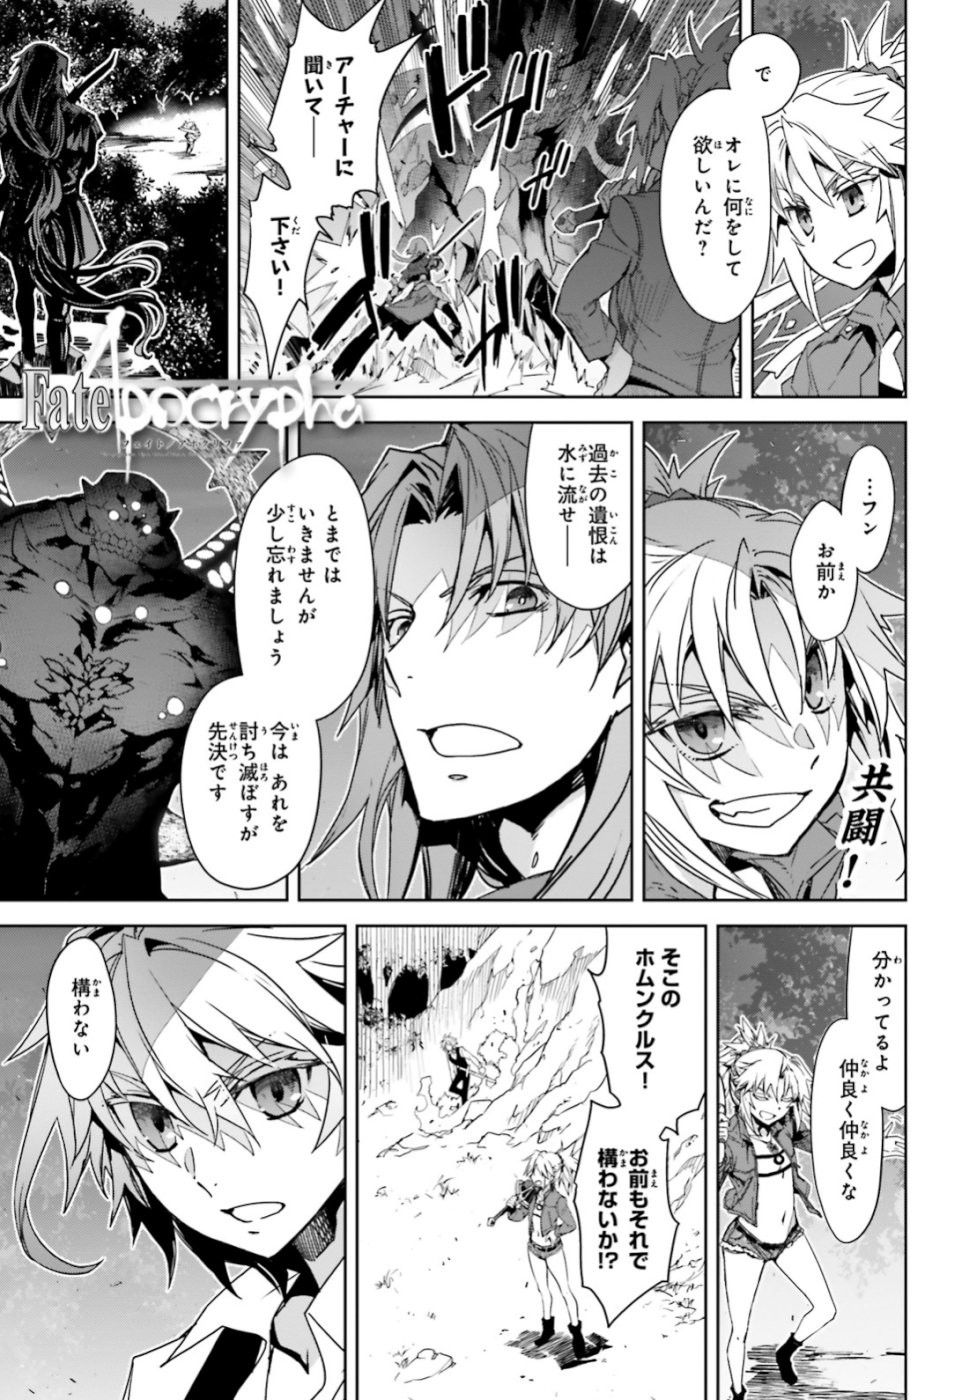 Fate-Apocrypha - Chapter 36 - Page 1